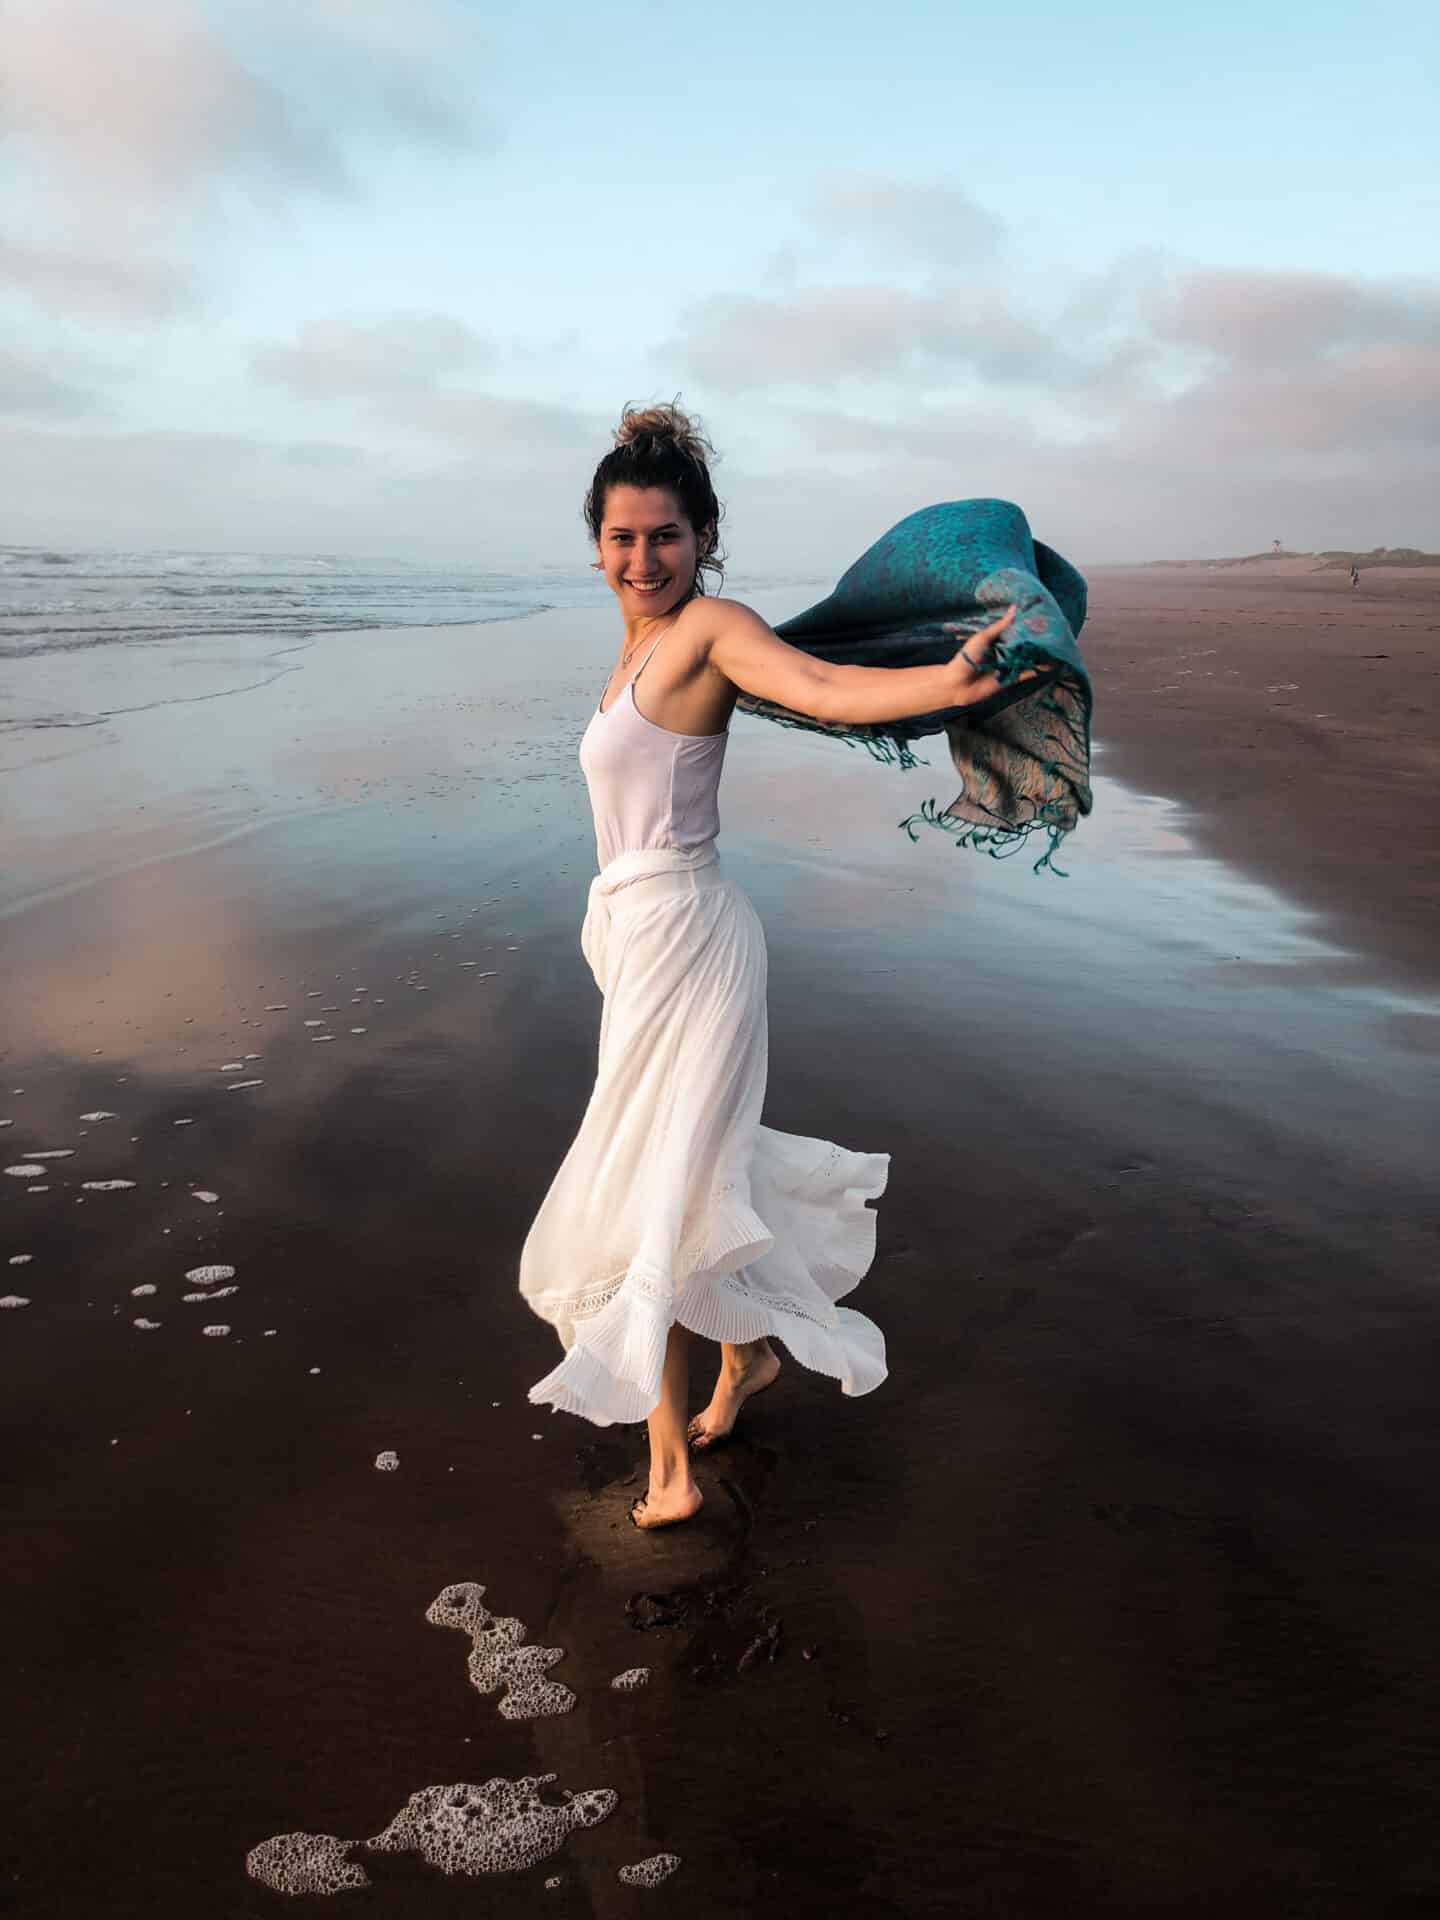 female model in white dress and blue scarf laughing on a beach in el jadid